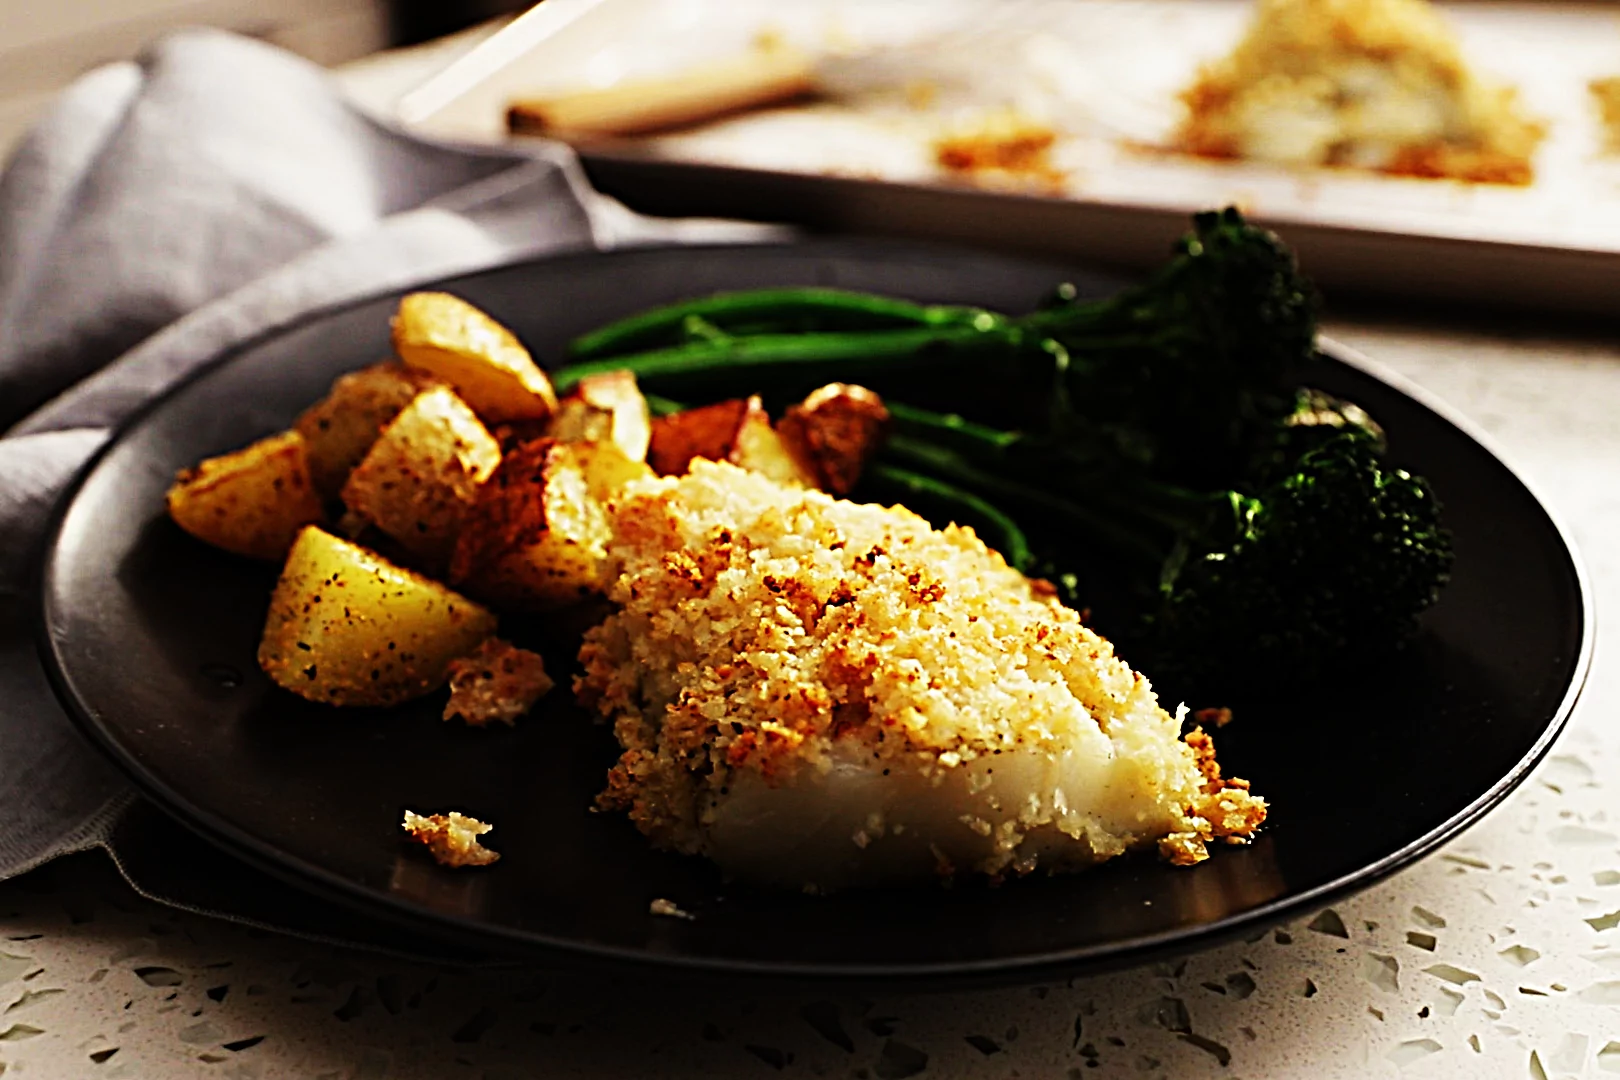 Stupid-Easy Recipe for Baked Cod with Crunchy Panko Crust (#1 Top-Rated)